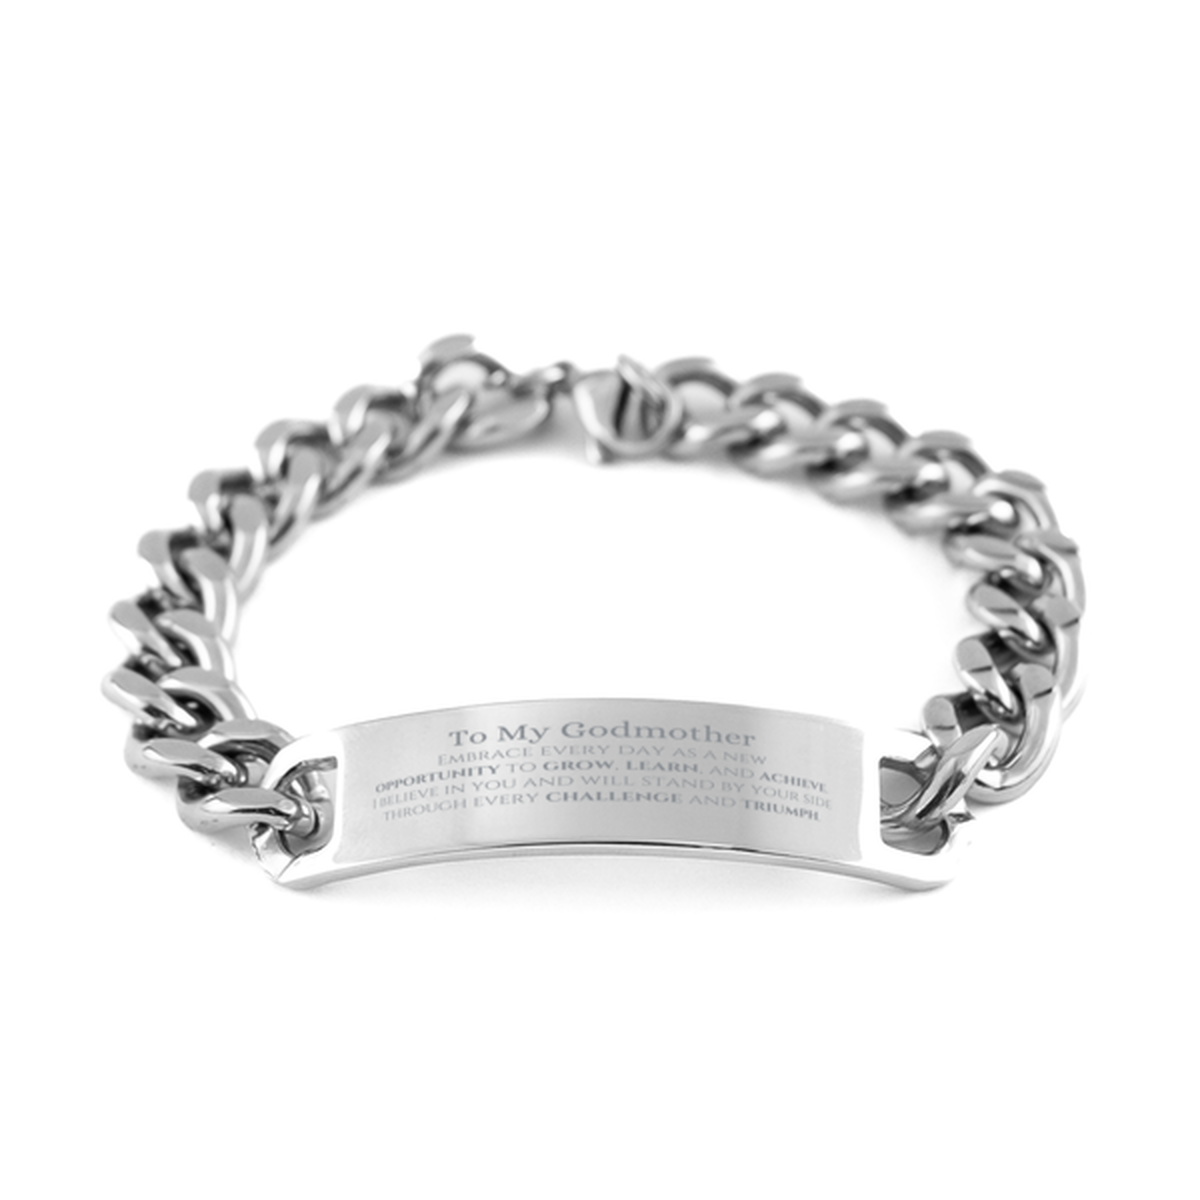 To My Godmother Gifts, I believe in you and will stand by your side, Inspirational Cuban Chain Stainless Steel Bracelet For Godmother, Birthday Christmas Motivational Godmother Gifts